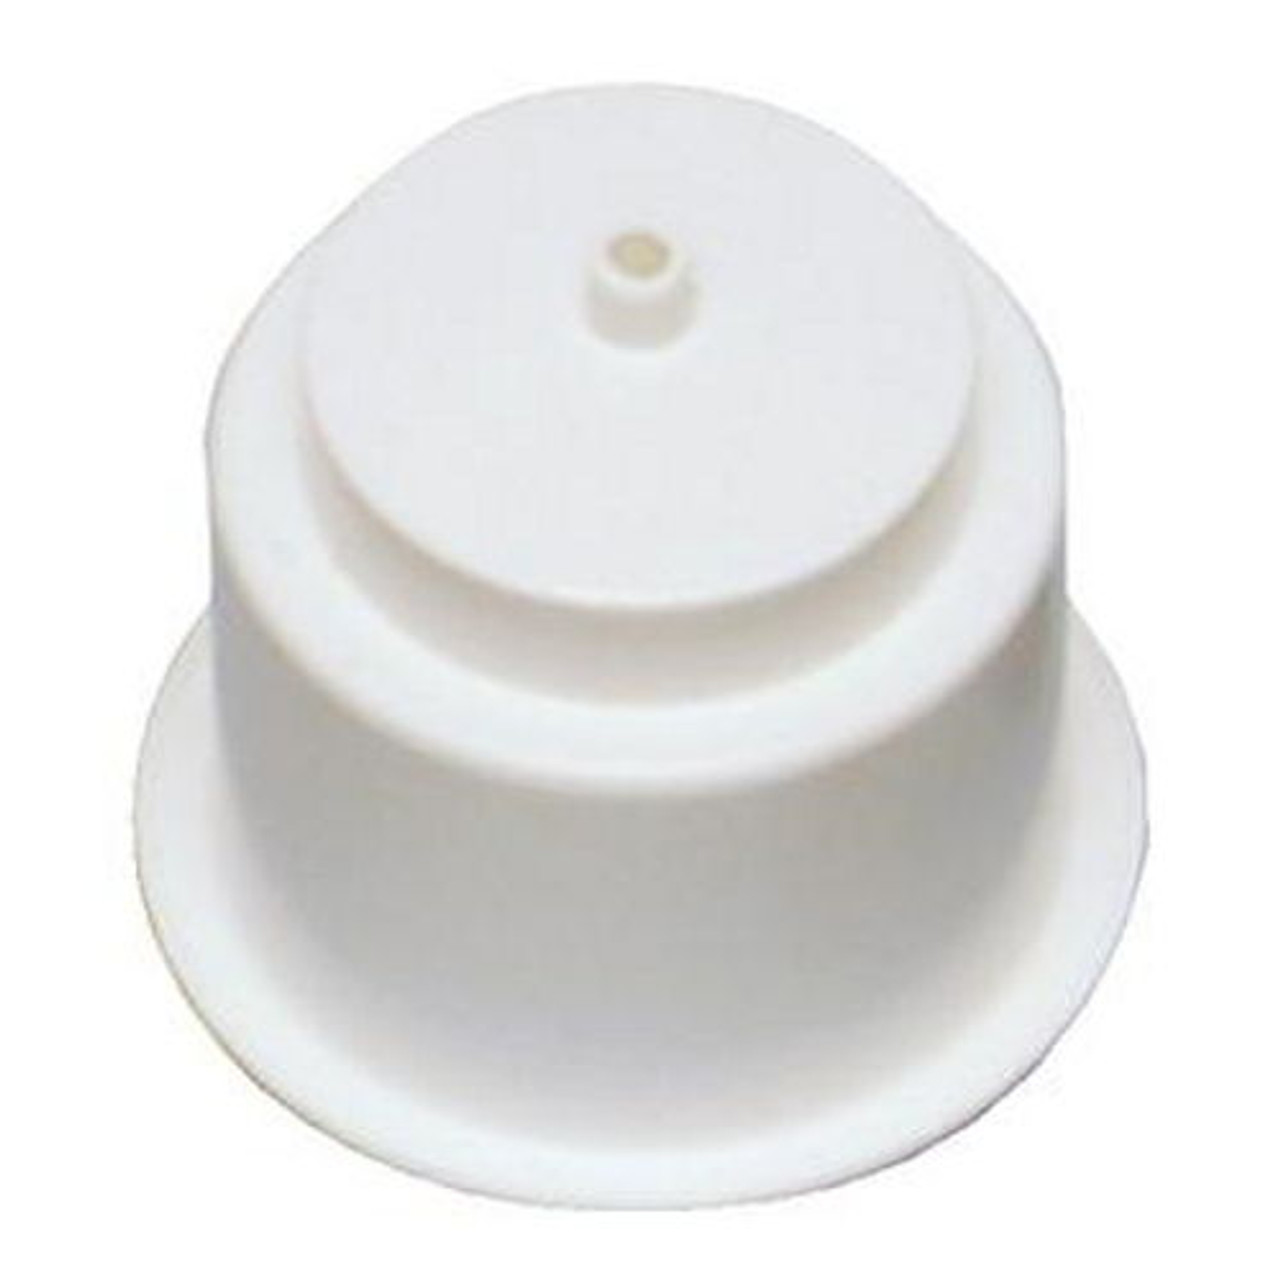 Recessed Mount White Plastic Drink Holder for Boats - Fits 3-3/4 Inch ...